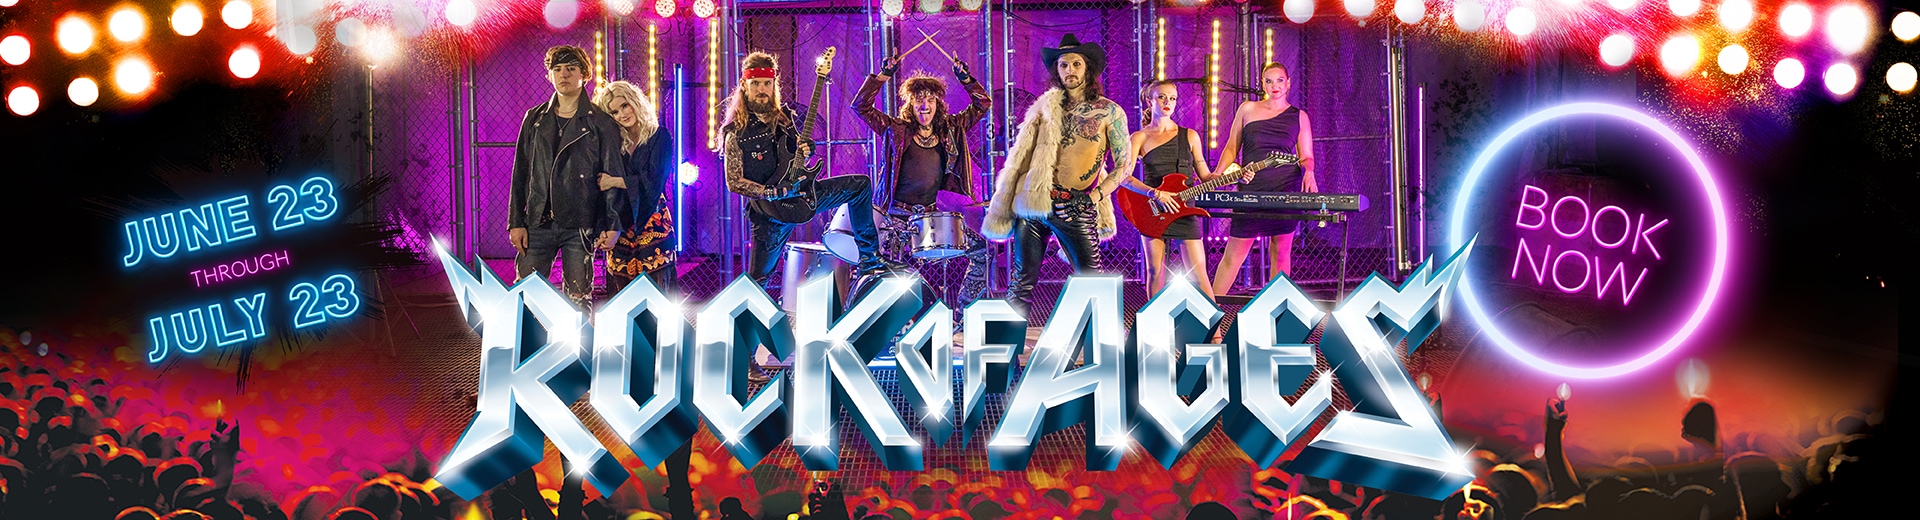 Rock of Ages  Paramount Theatre